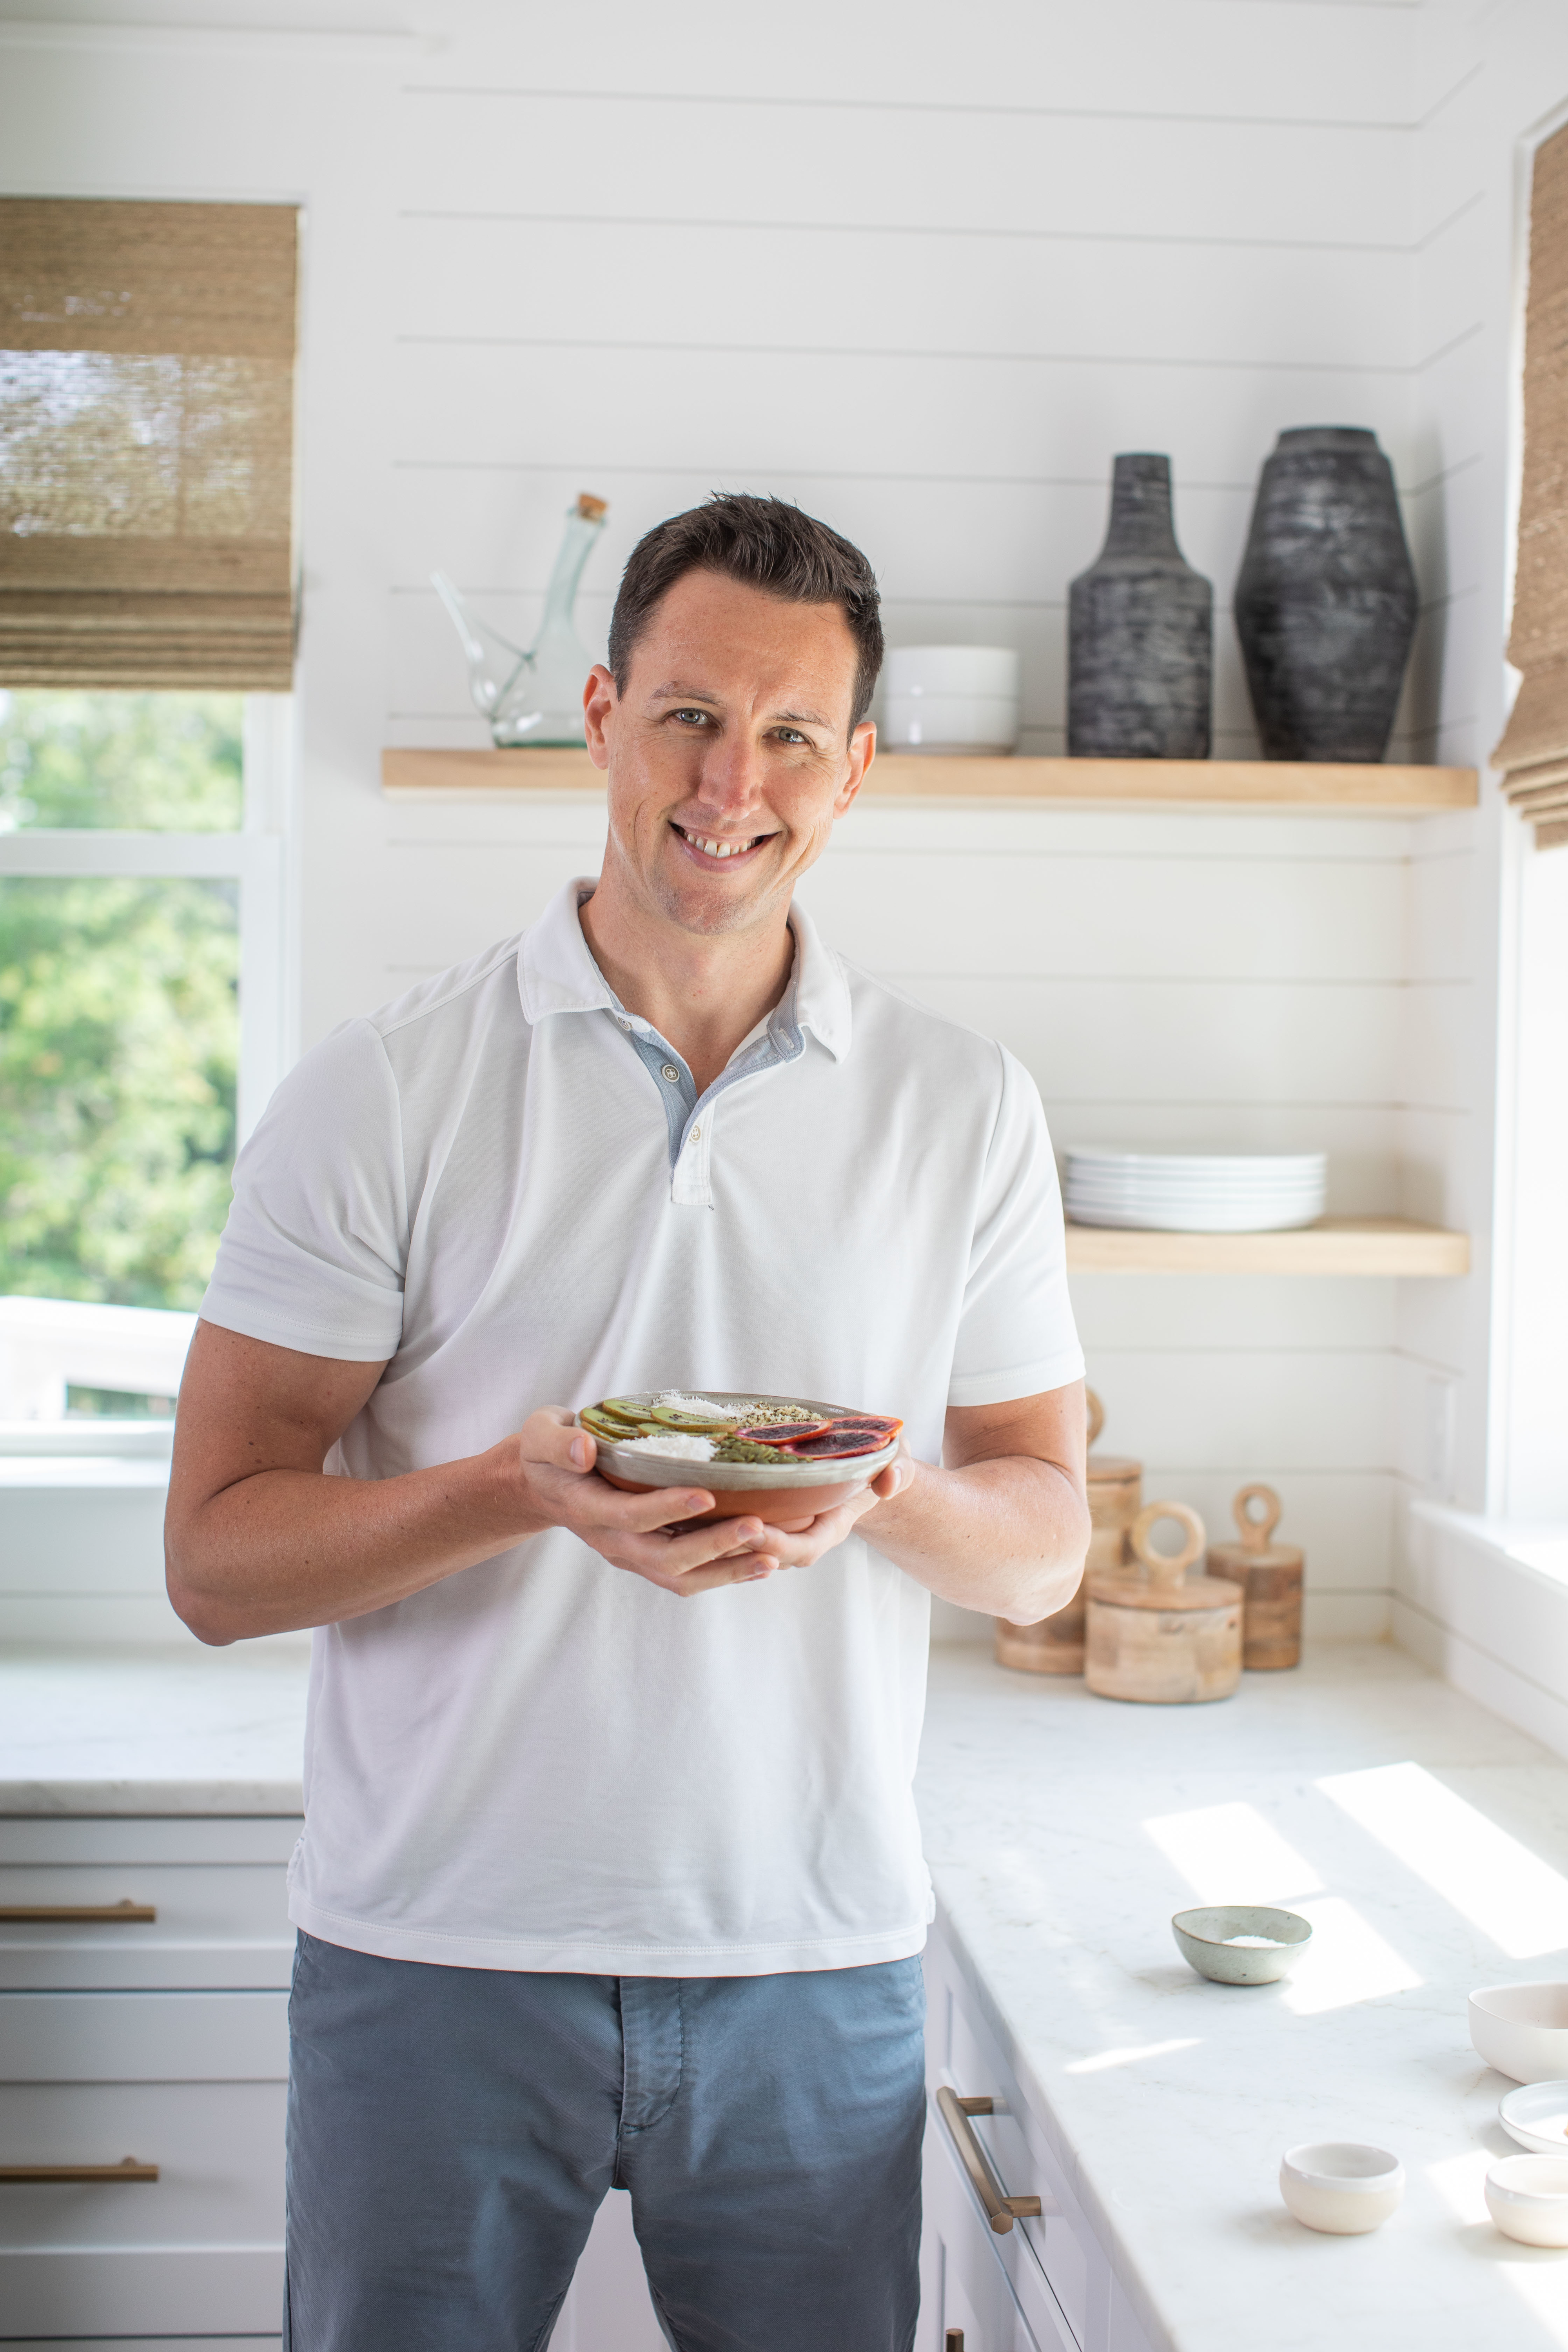 Man holding a bowl of food in a kitchen, smiling at the camera